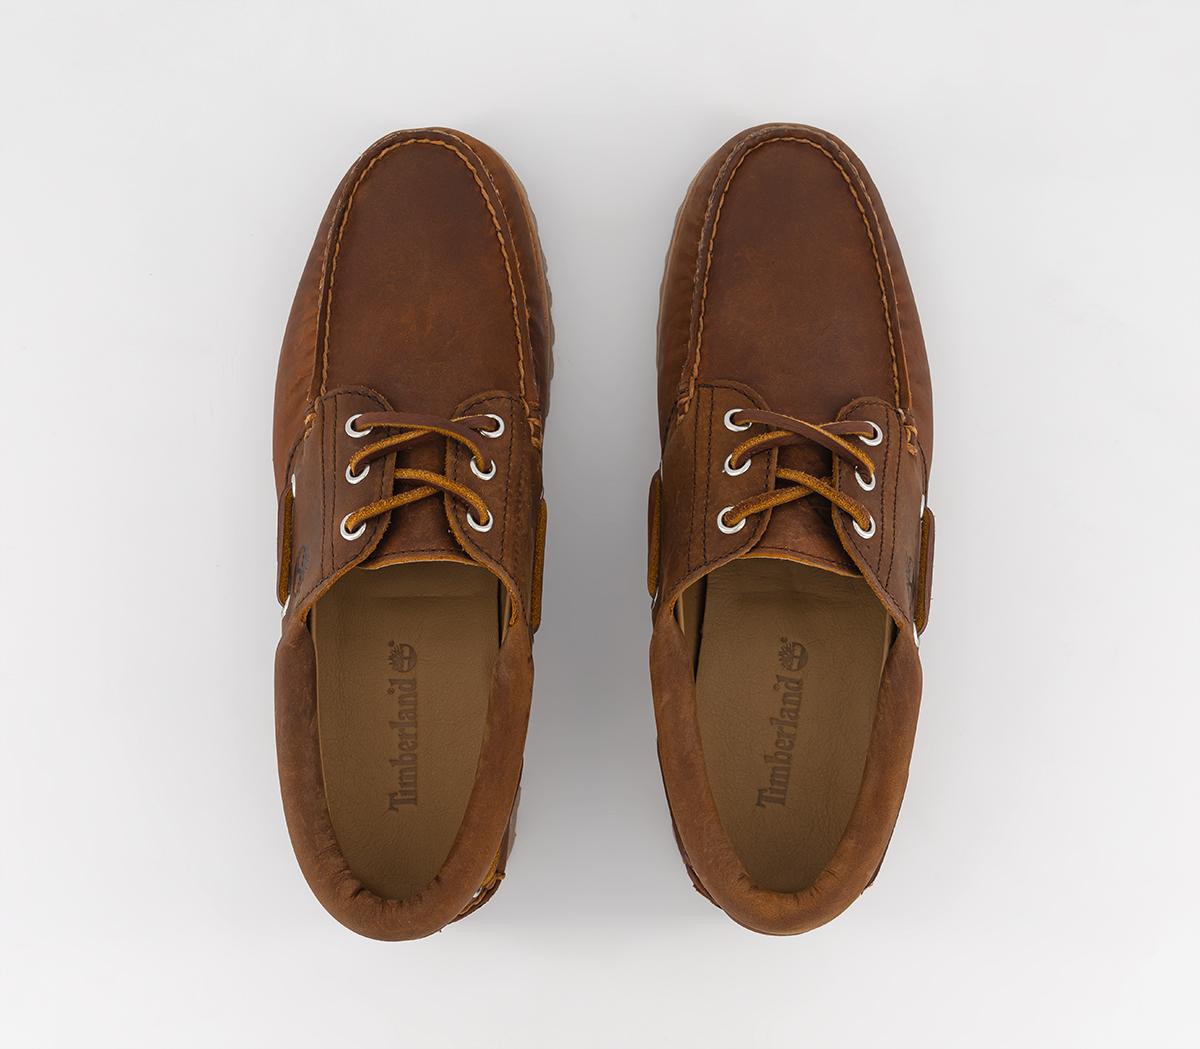 Timberland 3 Eye Classic Lug Boat Shoes Brown Leather - Men's Casual Shoes